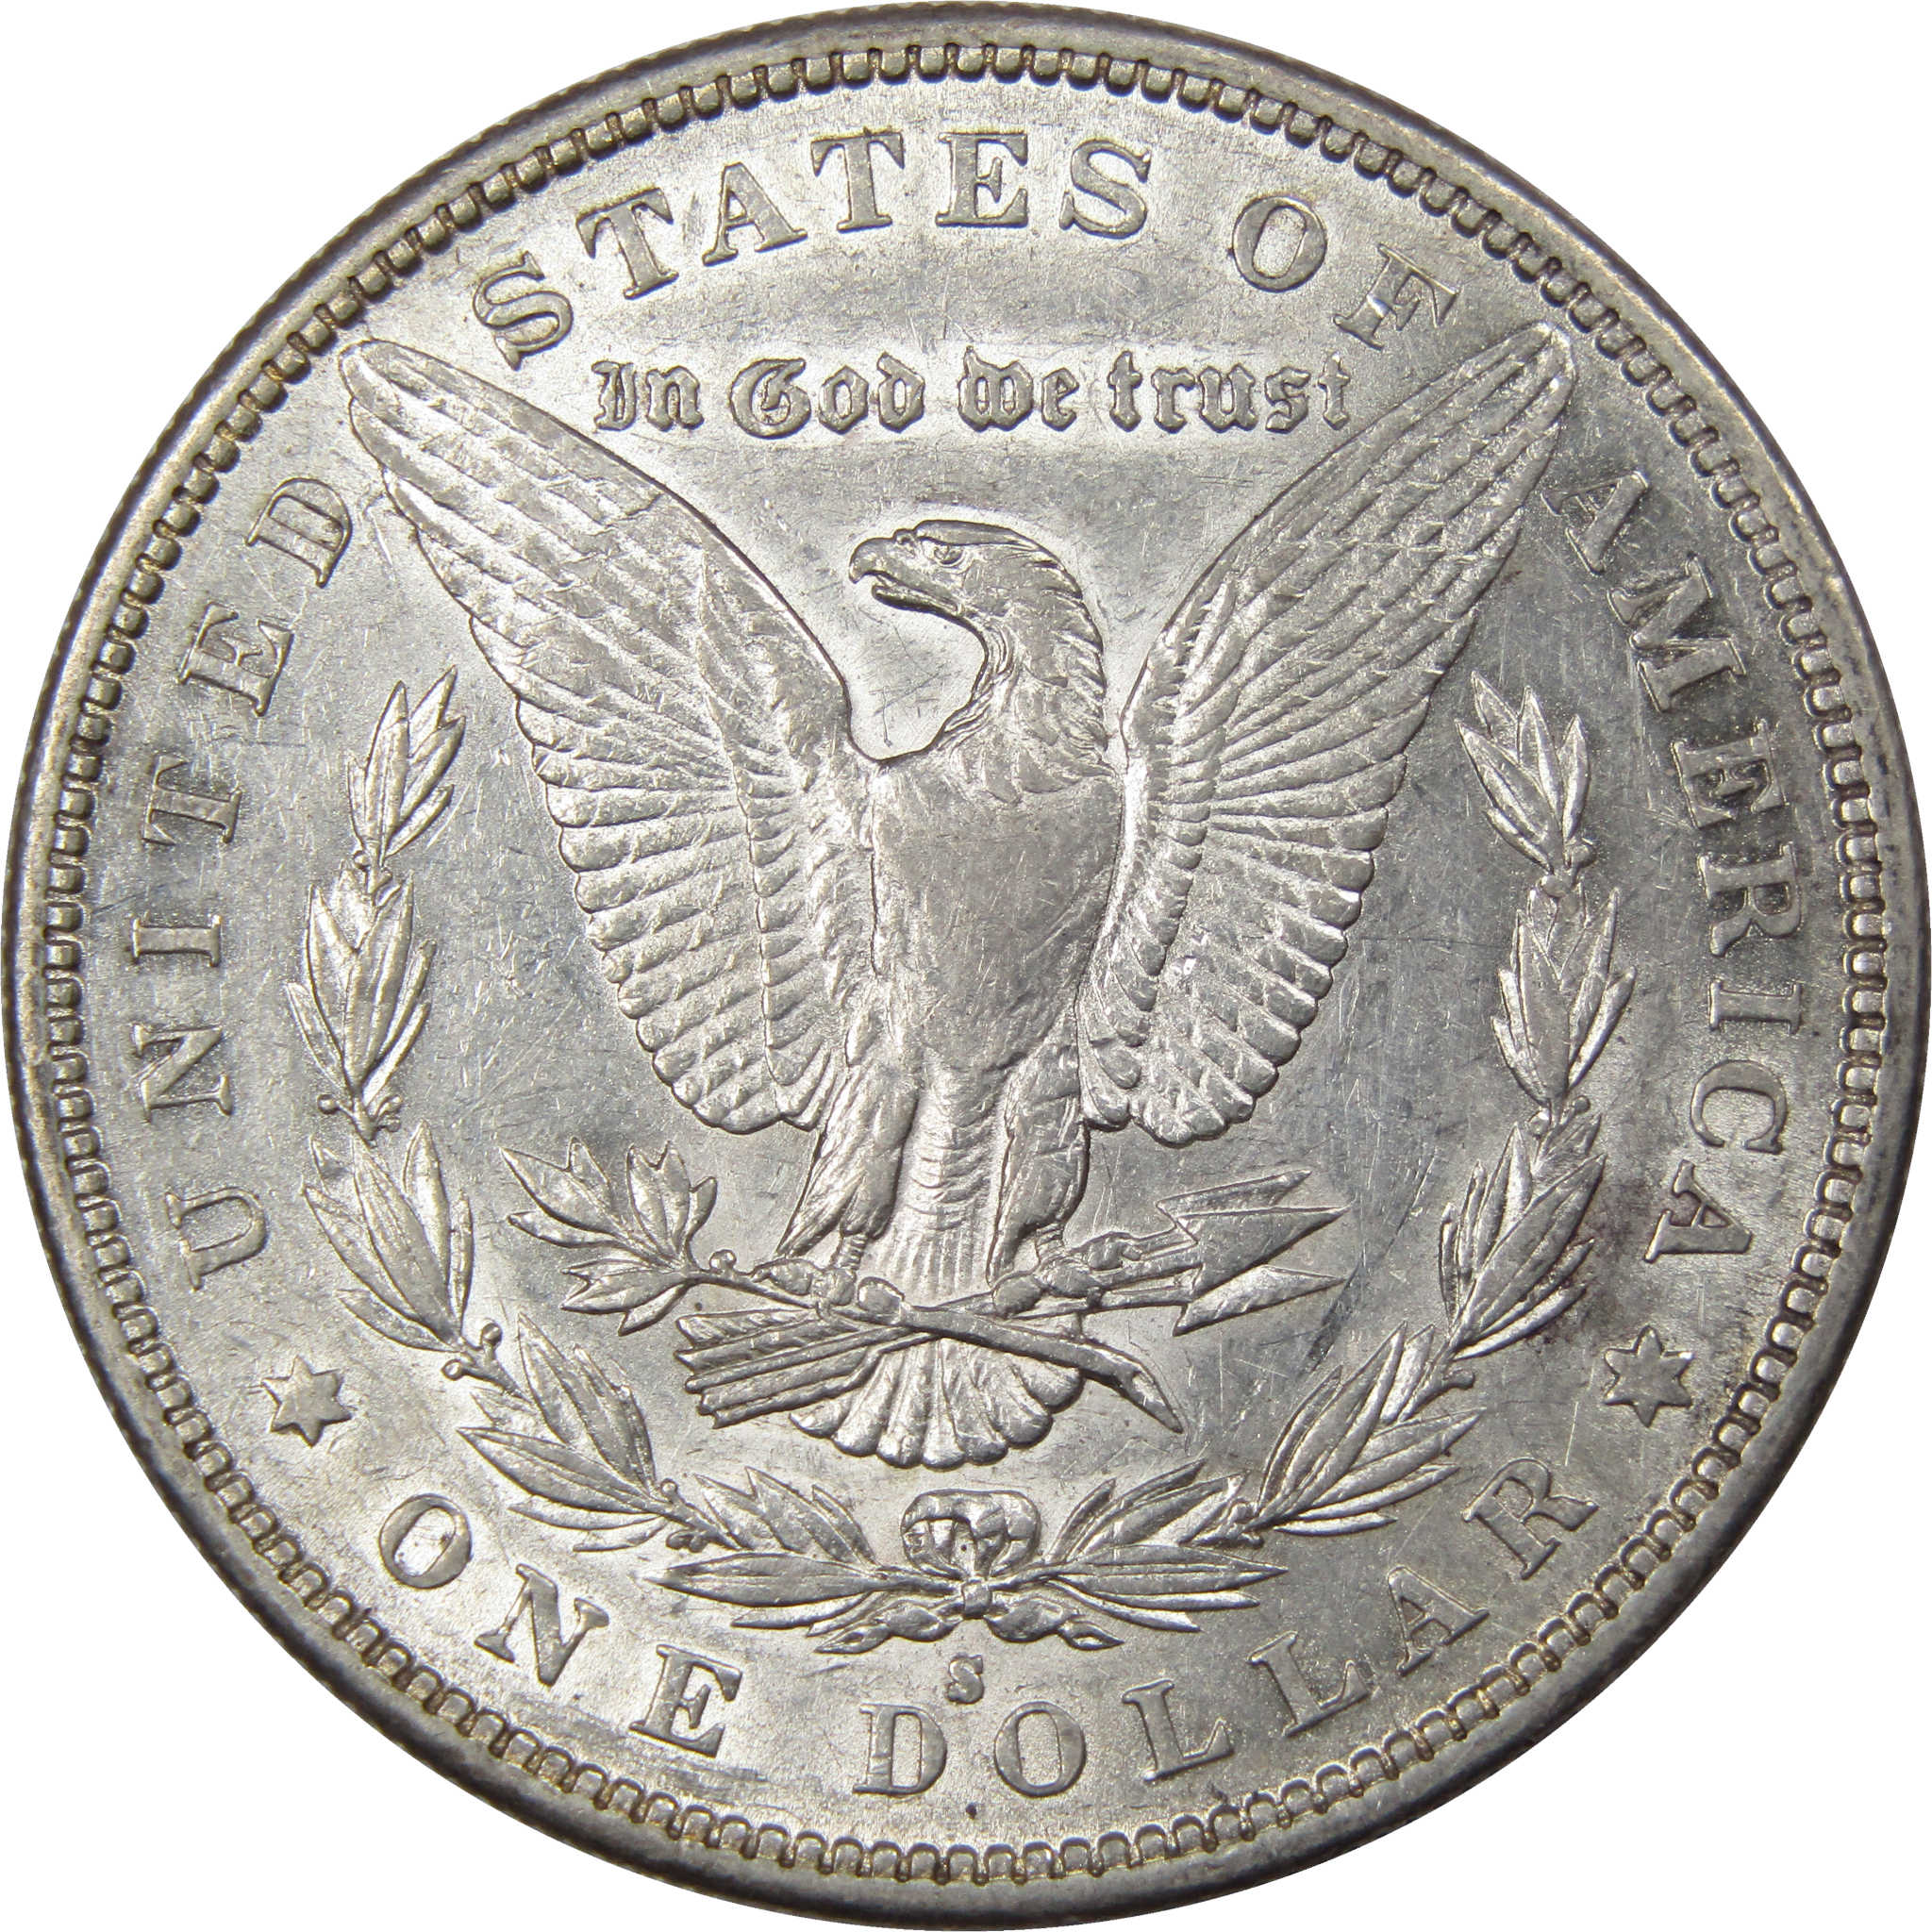 1883 S Morgan Dollar AU About Uncirculated 90% Silver SKU:I1641 - Morgan coin - Morgan silver dollar - Morgan silver dollar for sale - Profile Coins &amp; Collectibles